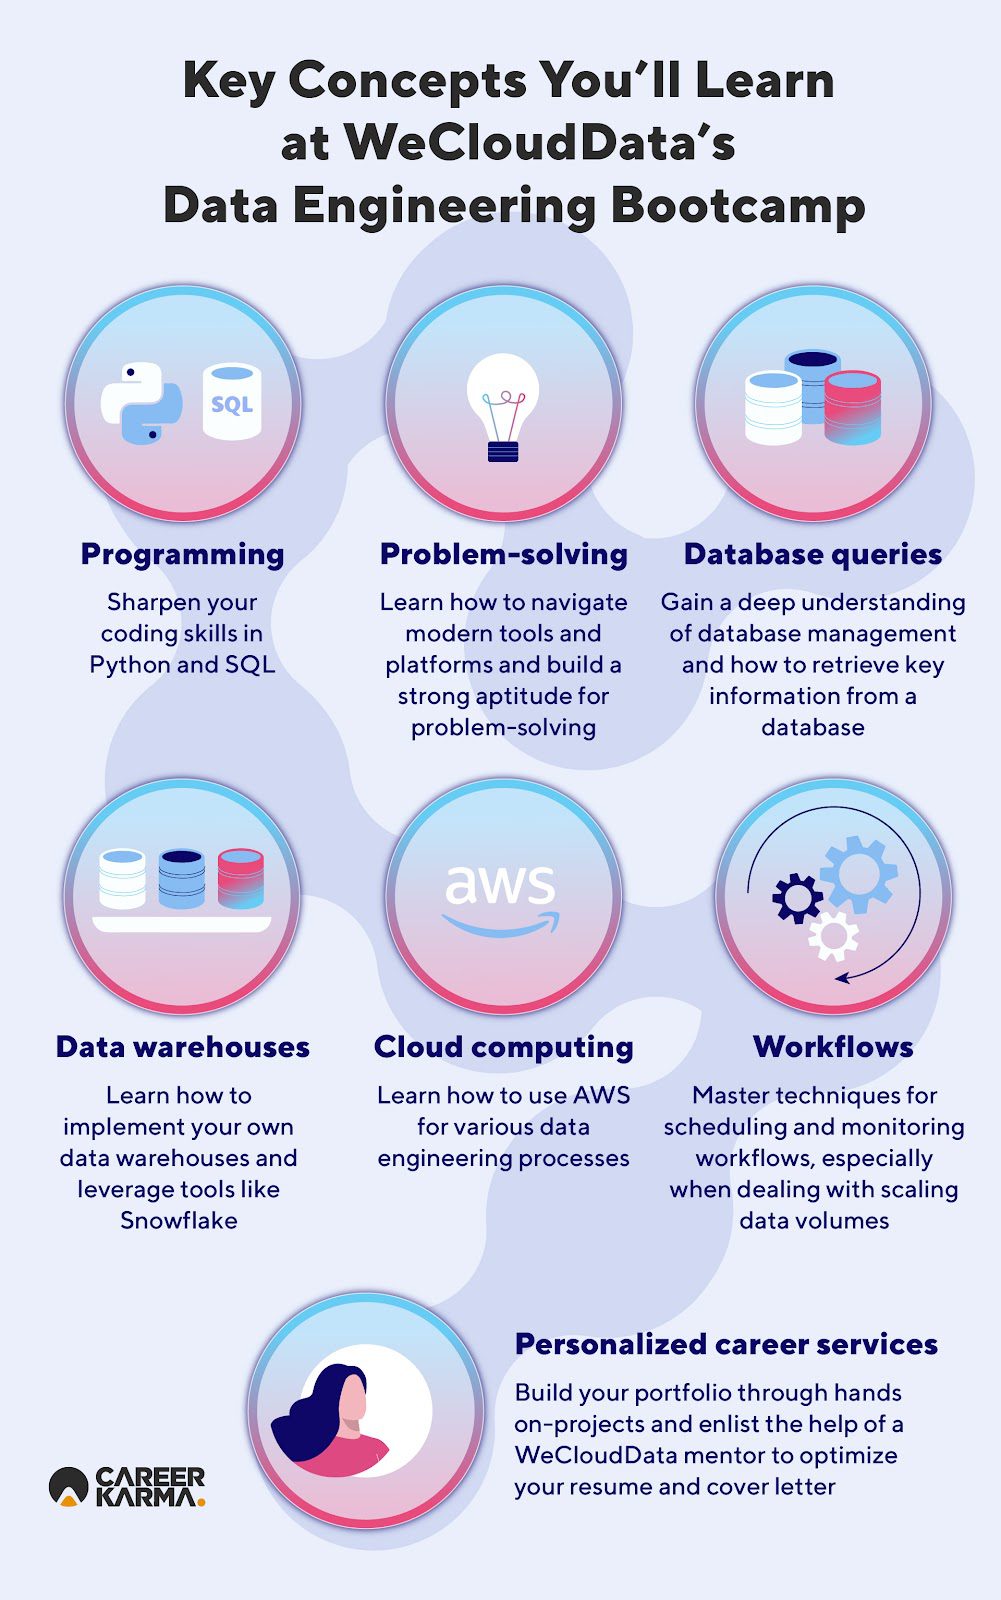 An infographic showing key concepts covered in WeCloudData’s Data Engineering program